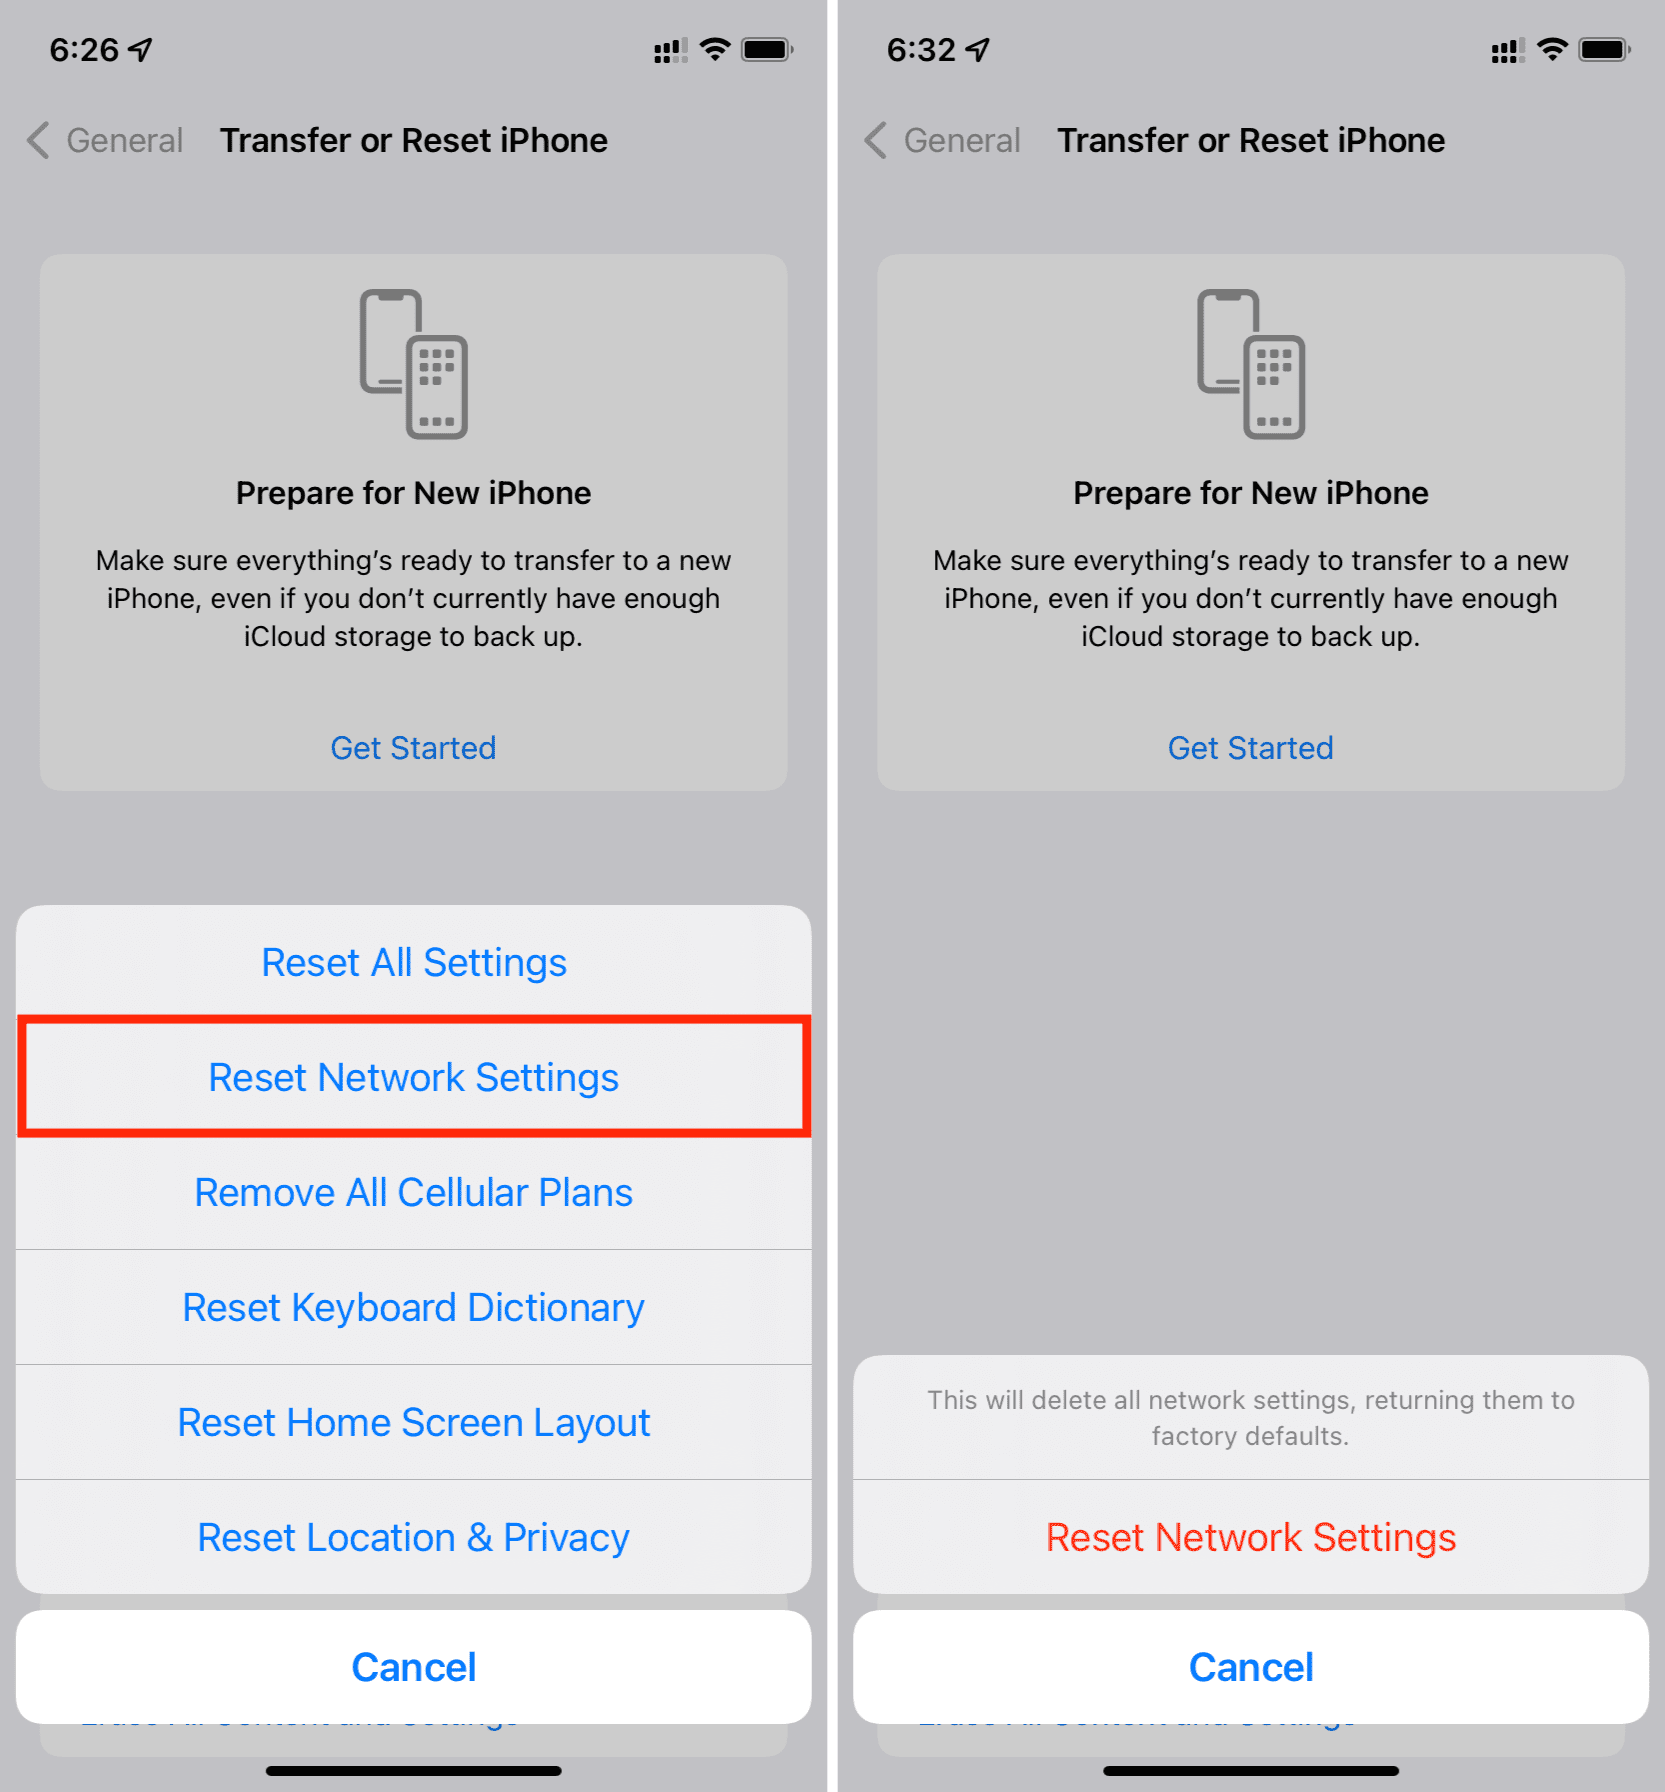 How to fix Universal Clipboard not working between your iPhone, iPad, and Mac